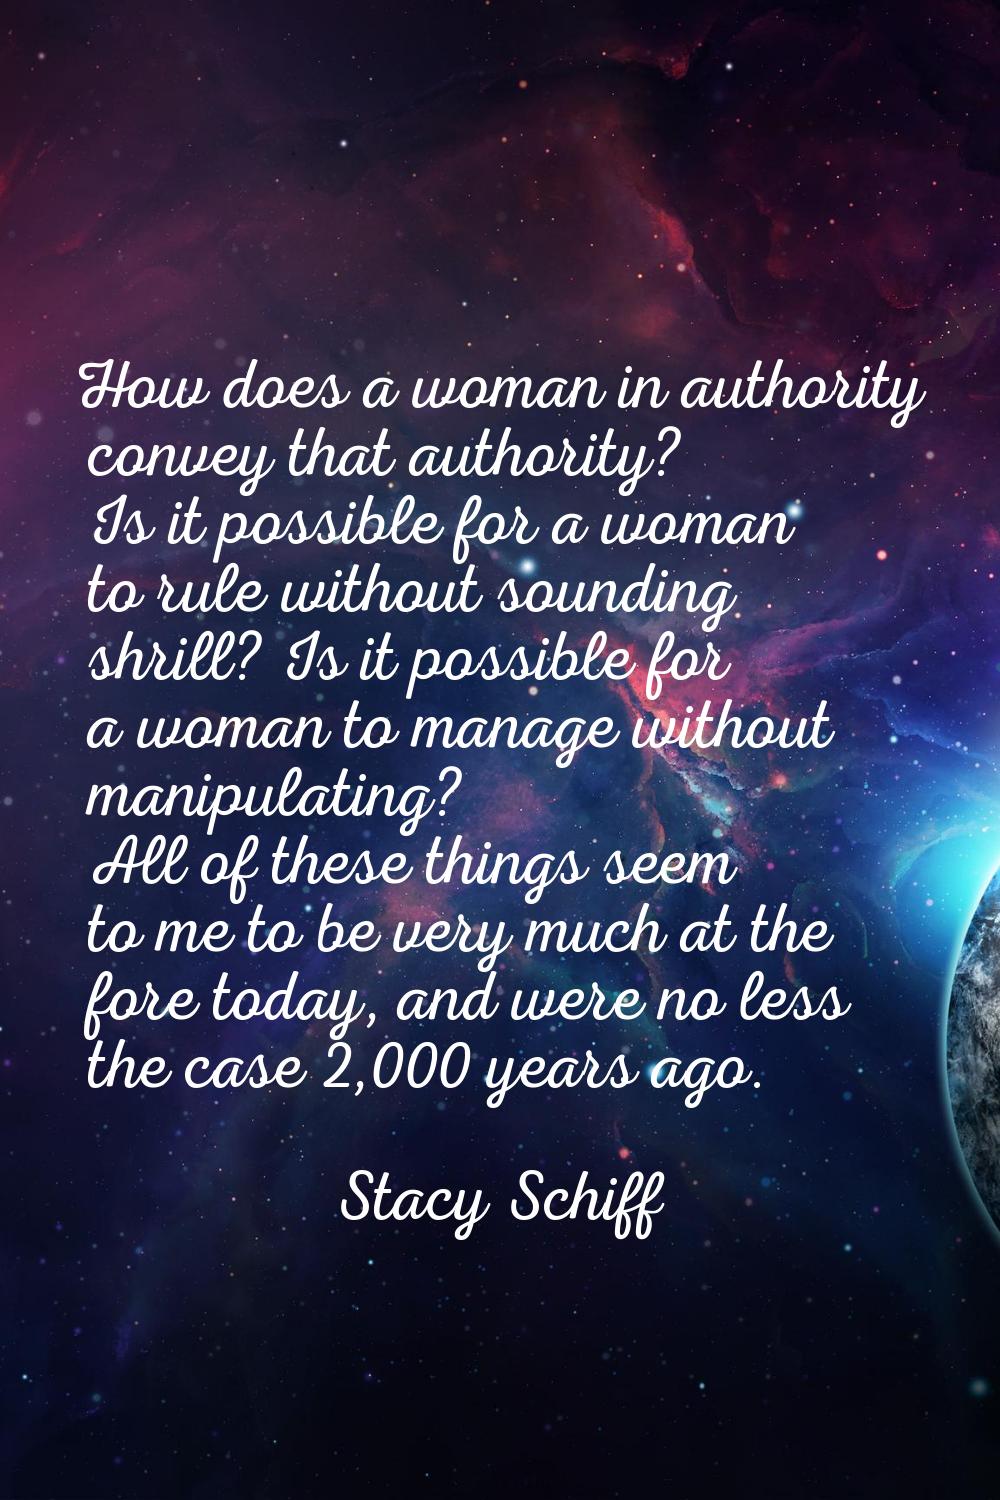 How does a woman in authority convey that authority? Is it possible for a woman to rule without sou